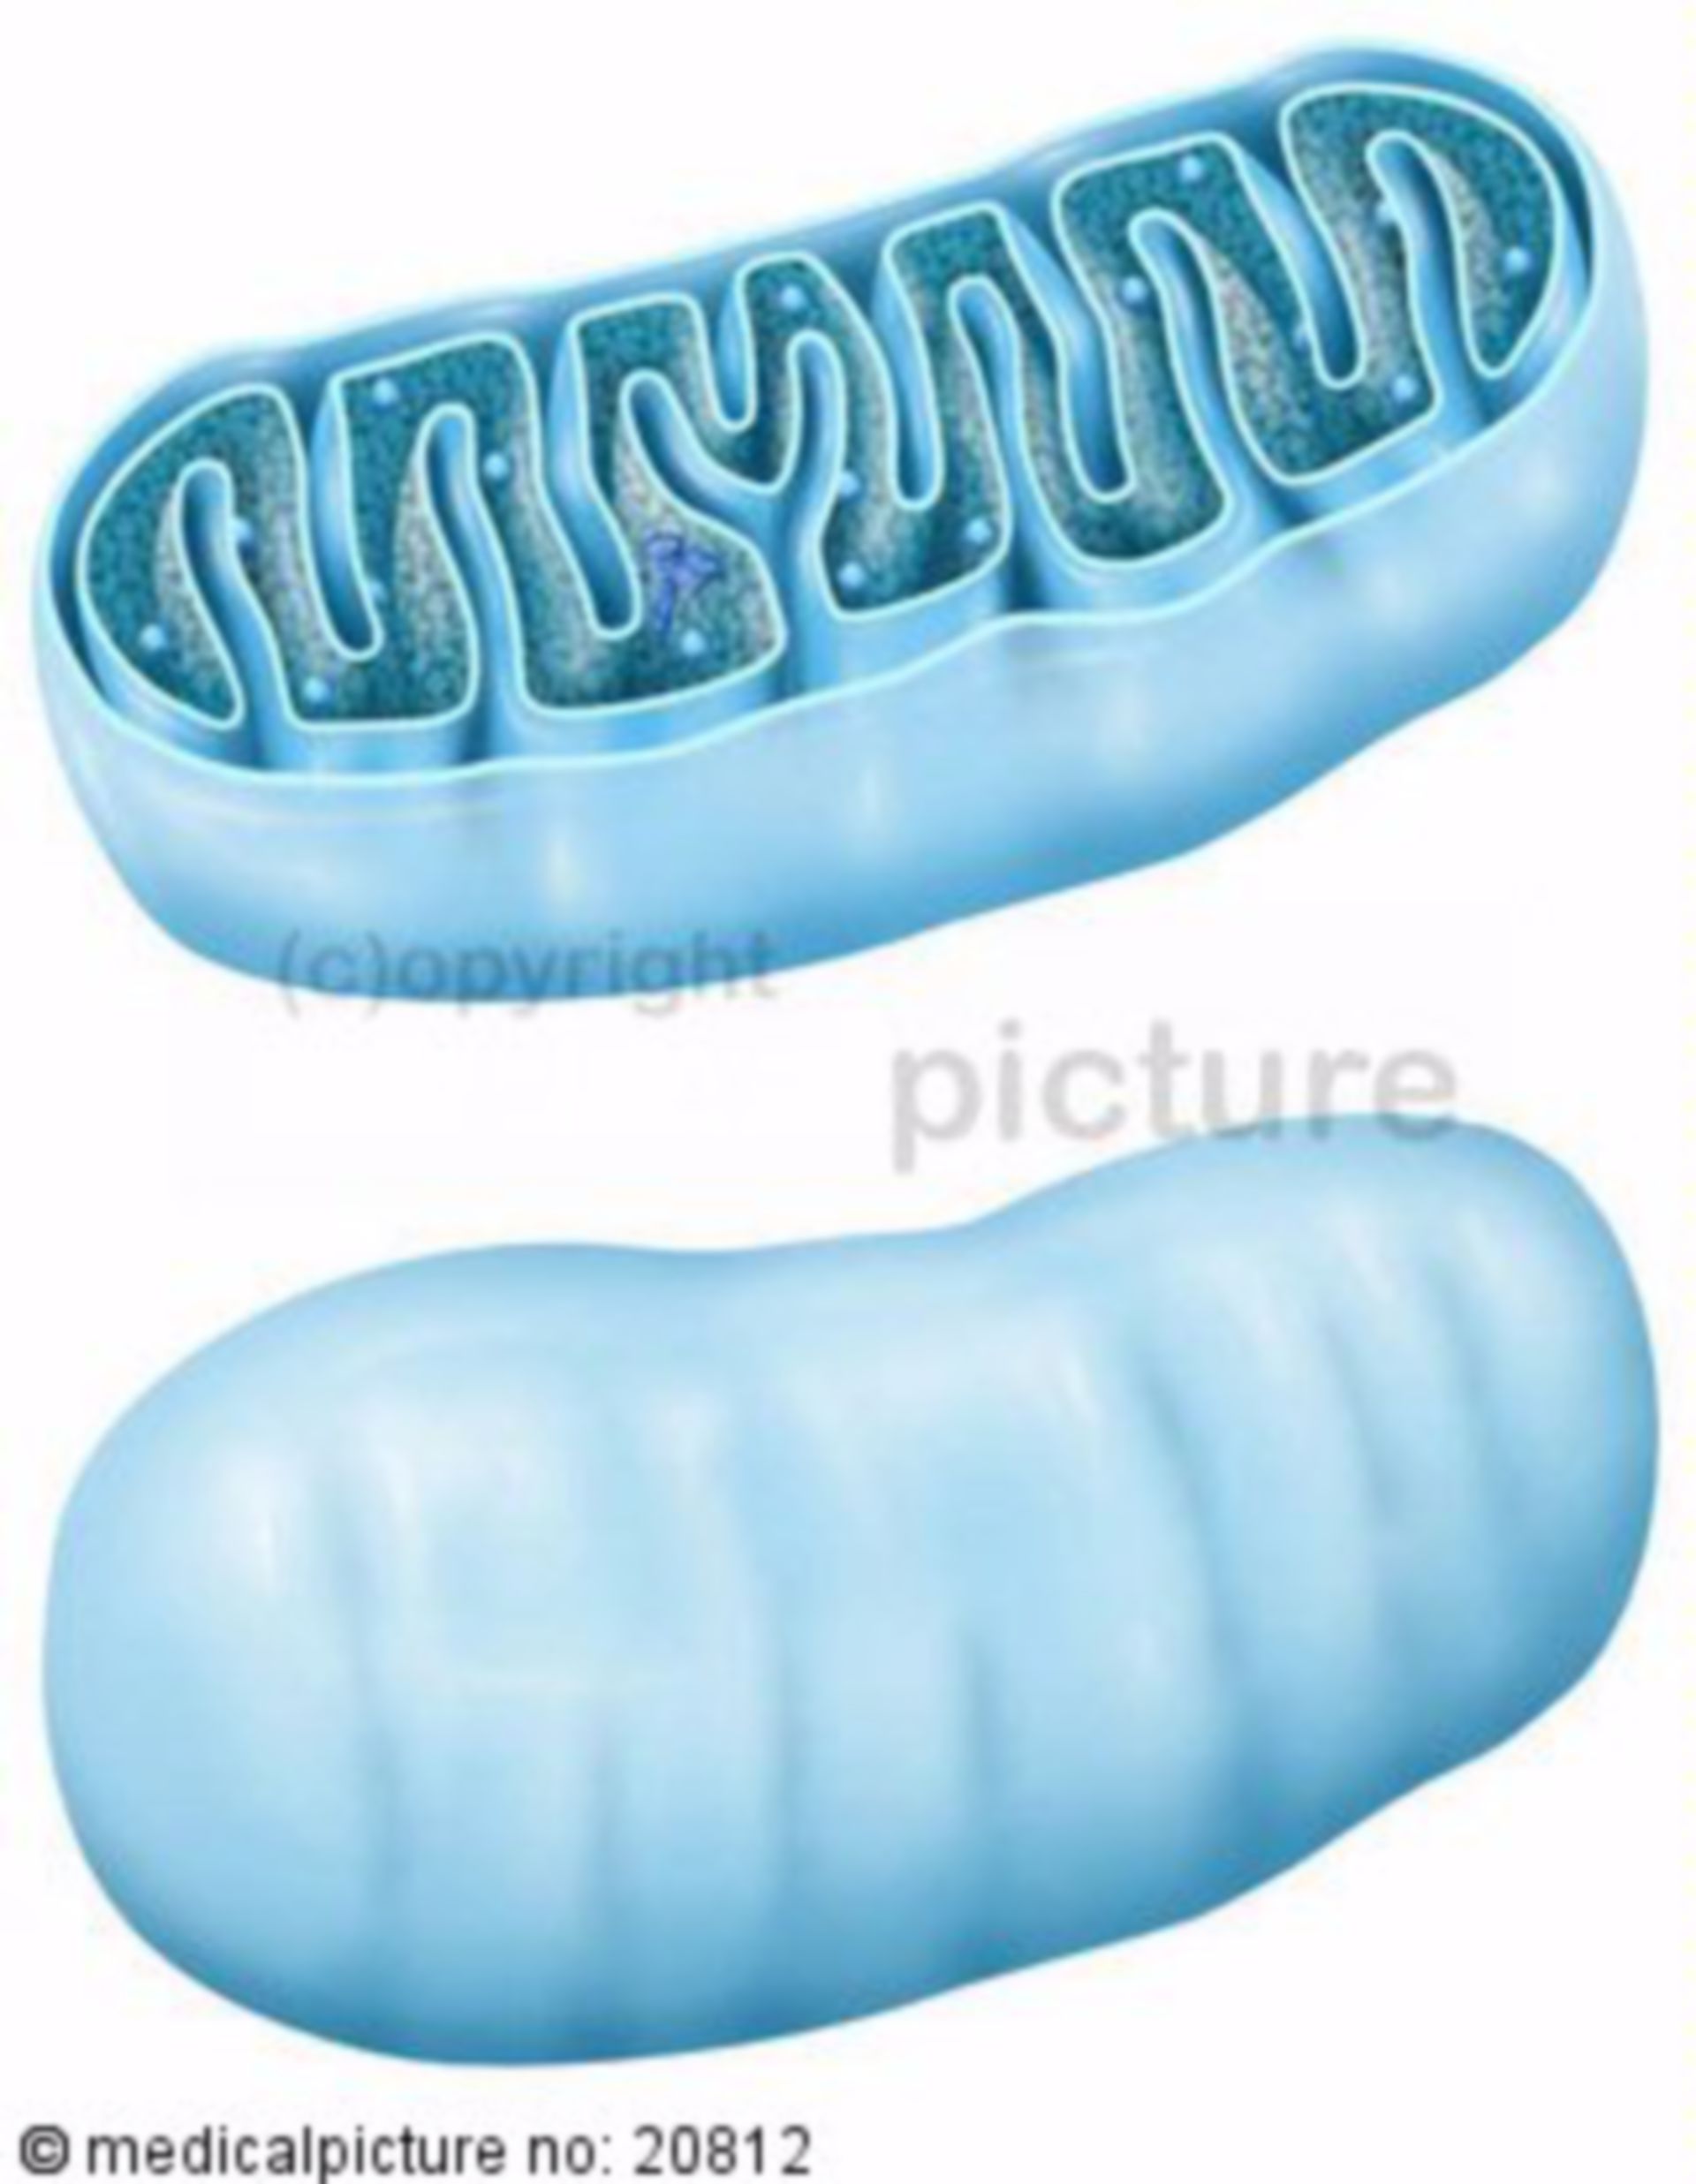 Section of a Mitochondrion